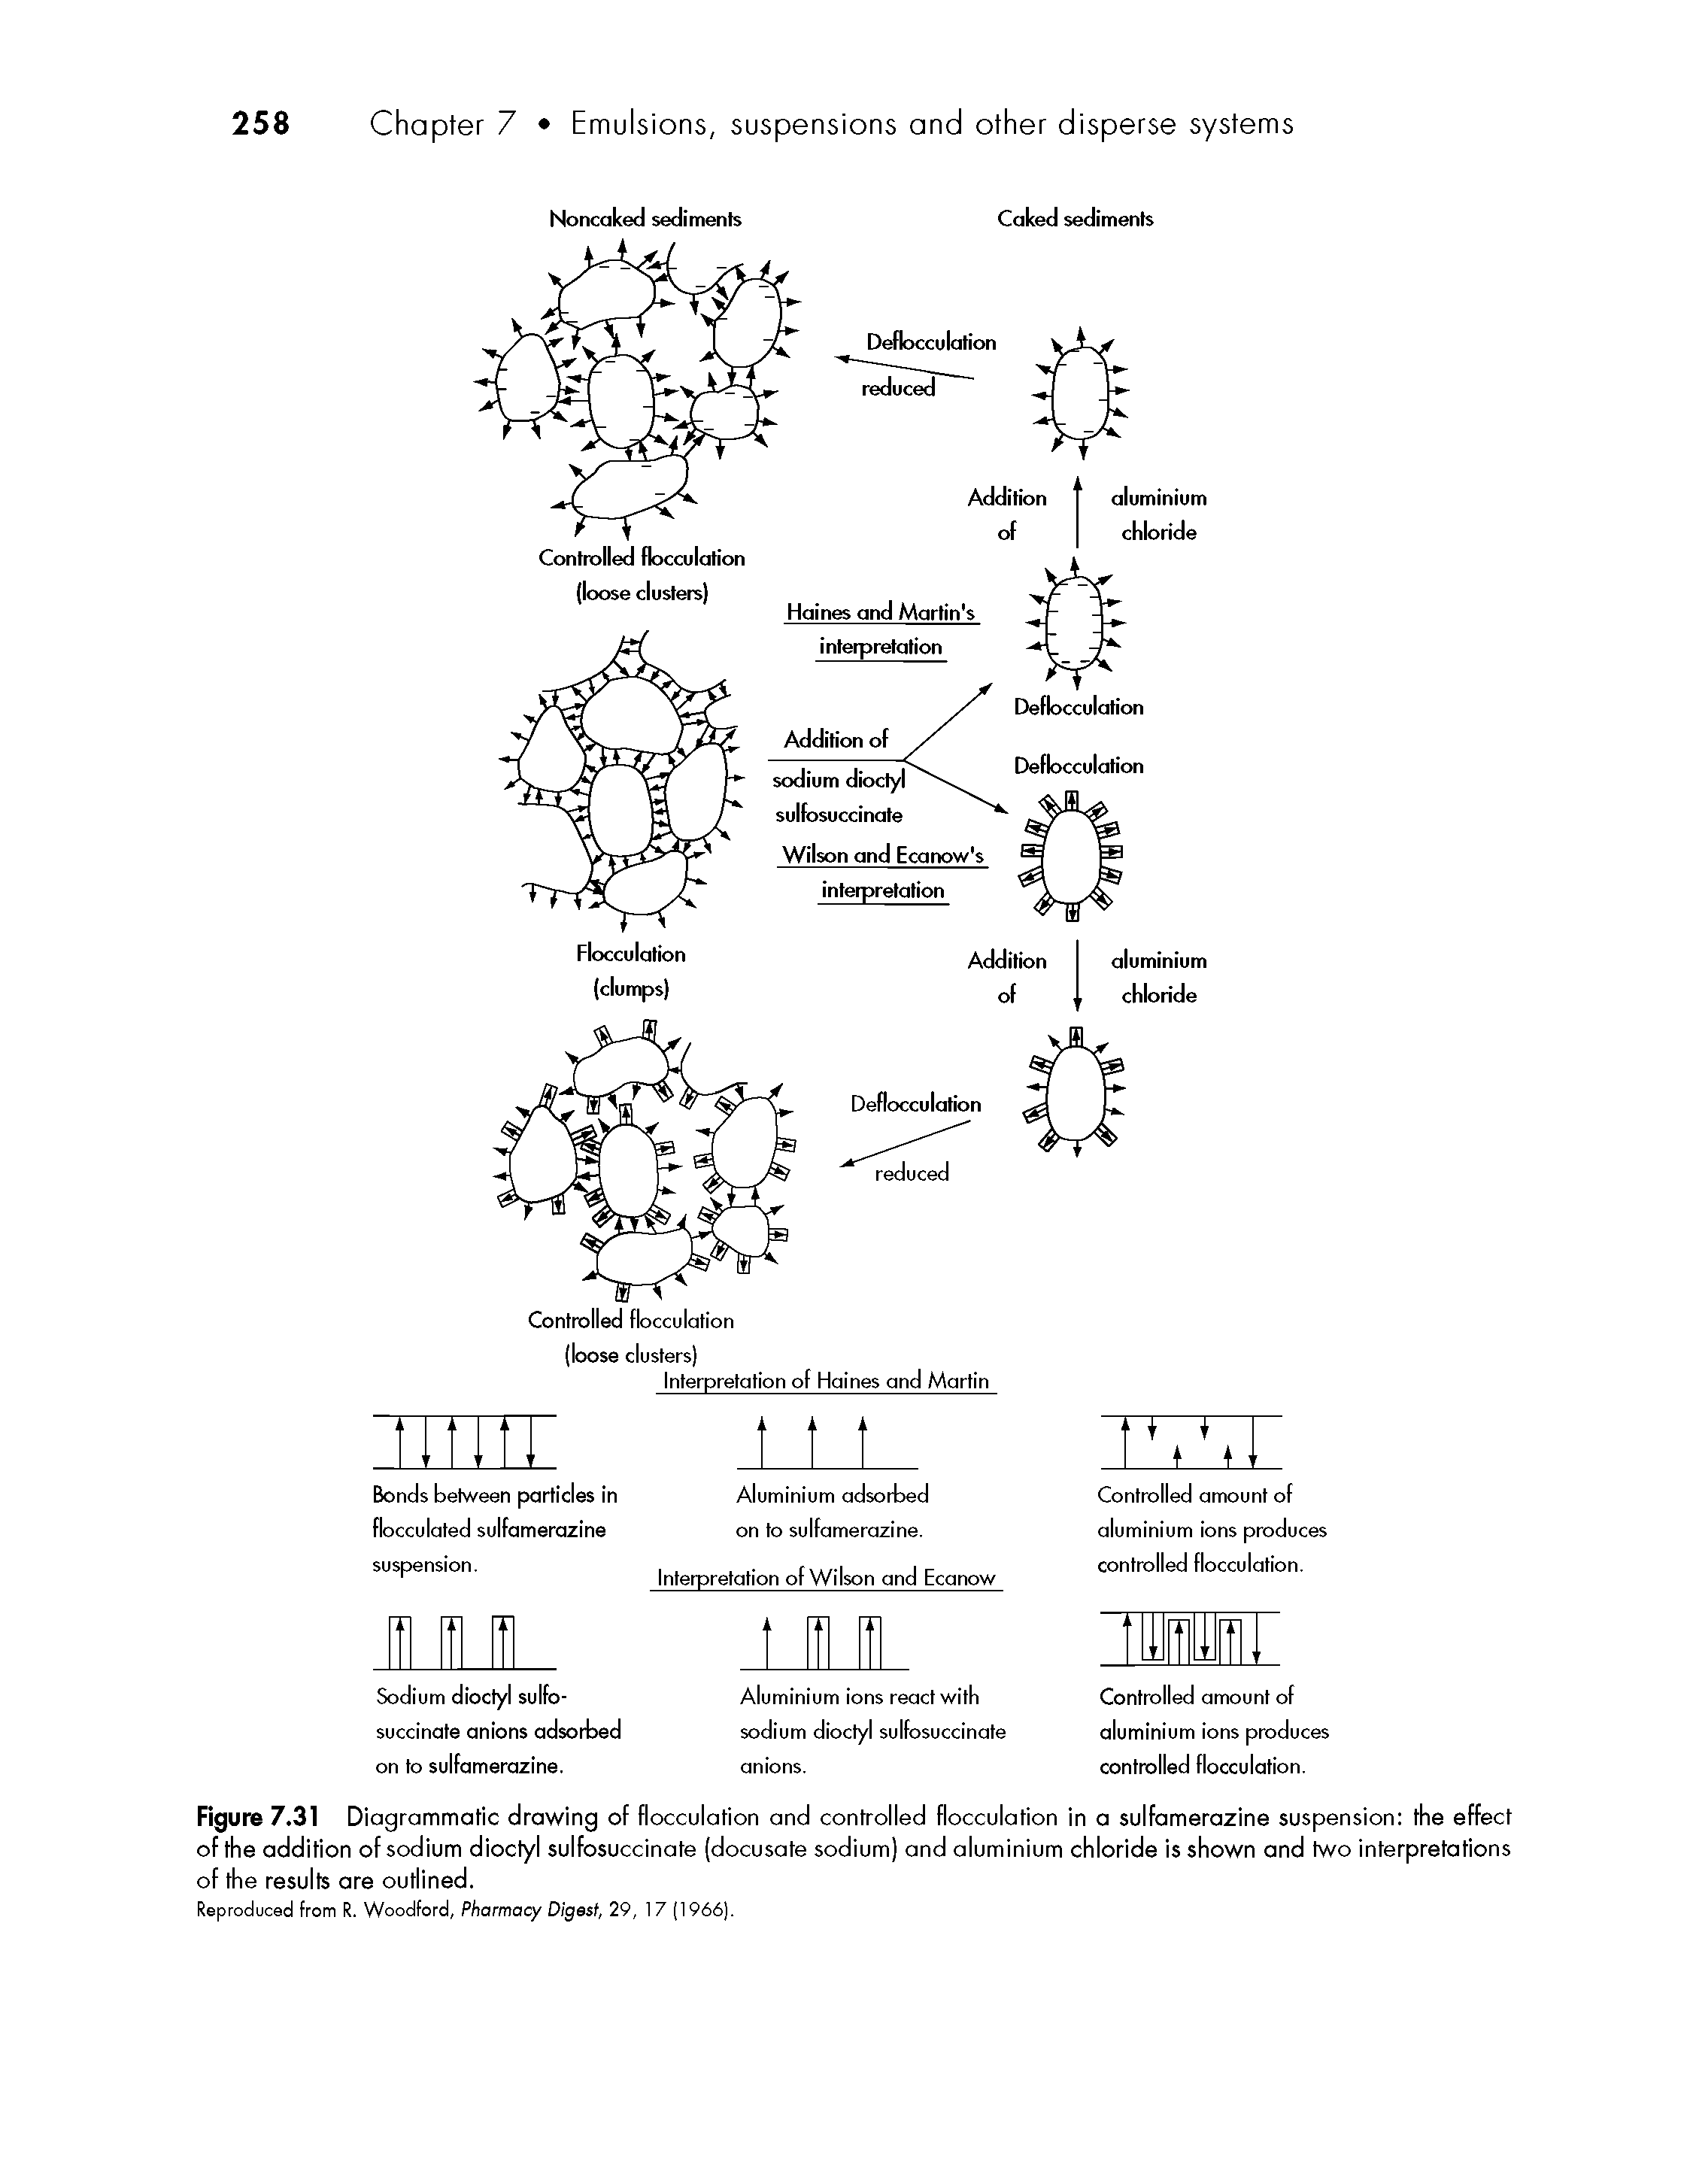 Figure 7.31 Diagrammatic drawing of flocculation and controlled flocculation in a sulfamerazine suspension the effect of the addition of sodium dioctyl sulfosuccinate (docusate sodium) and aluminium chloride is shown and two interpretations of the results are outlined.